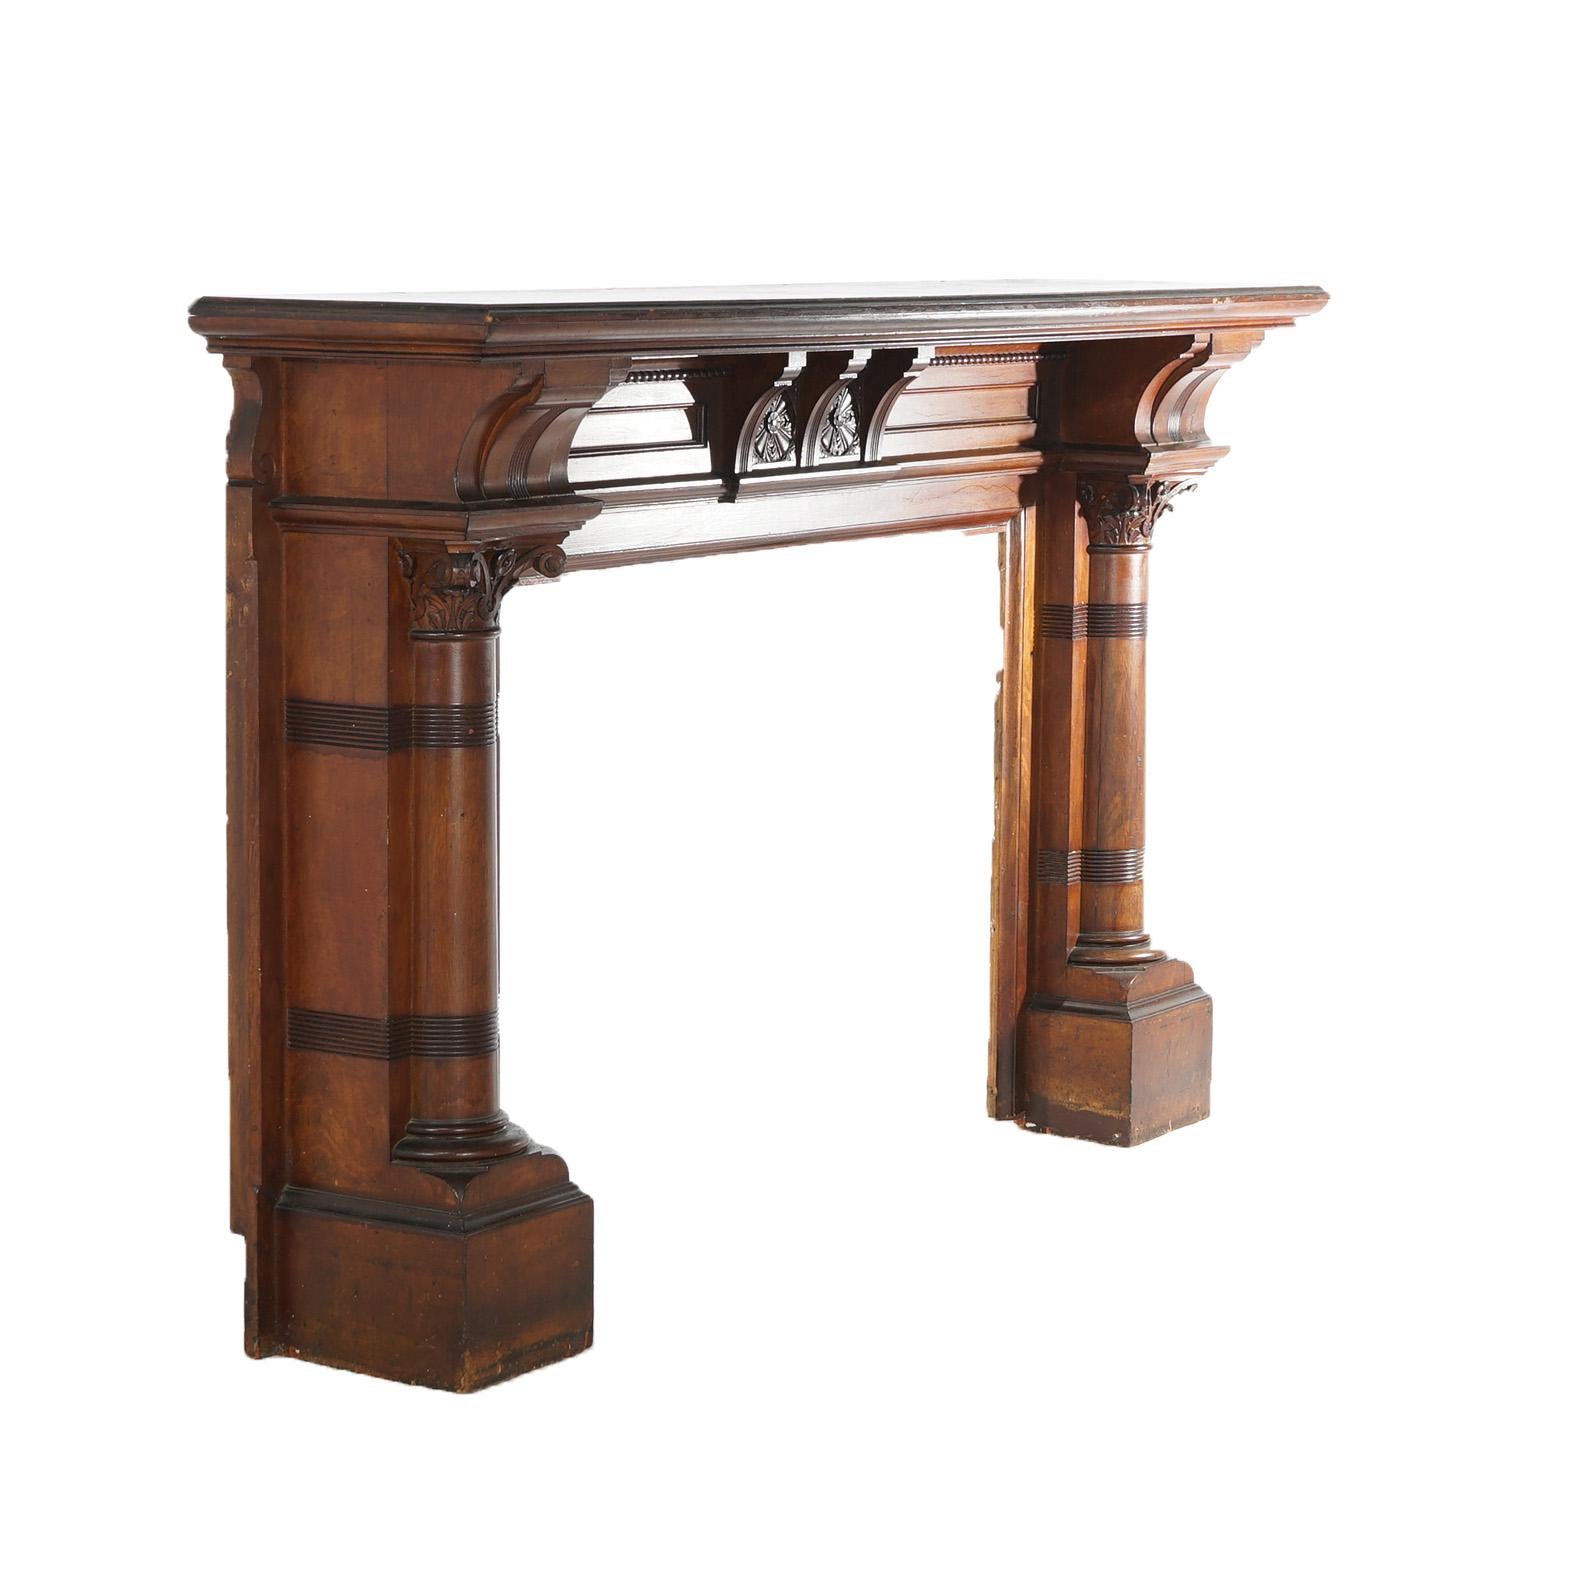 Antique R J Horner Neoclassical Oversized Oak Fireplace Mantle & Mirror C1890 For Sale 5